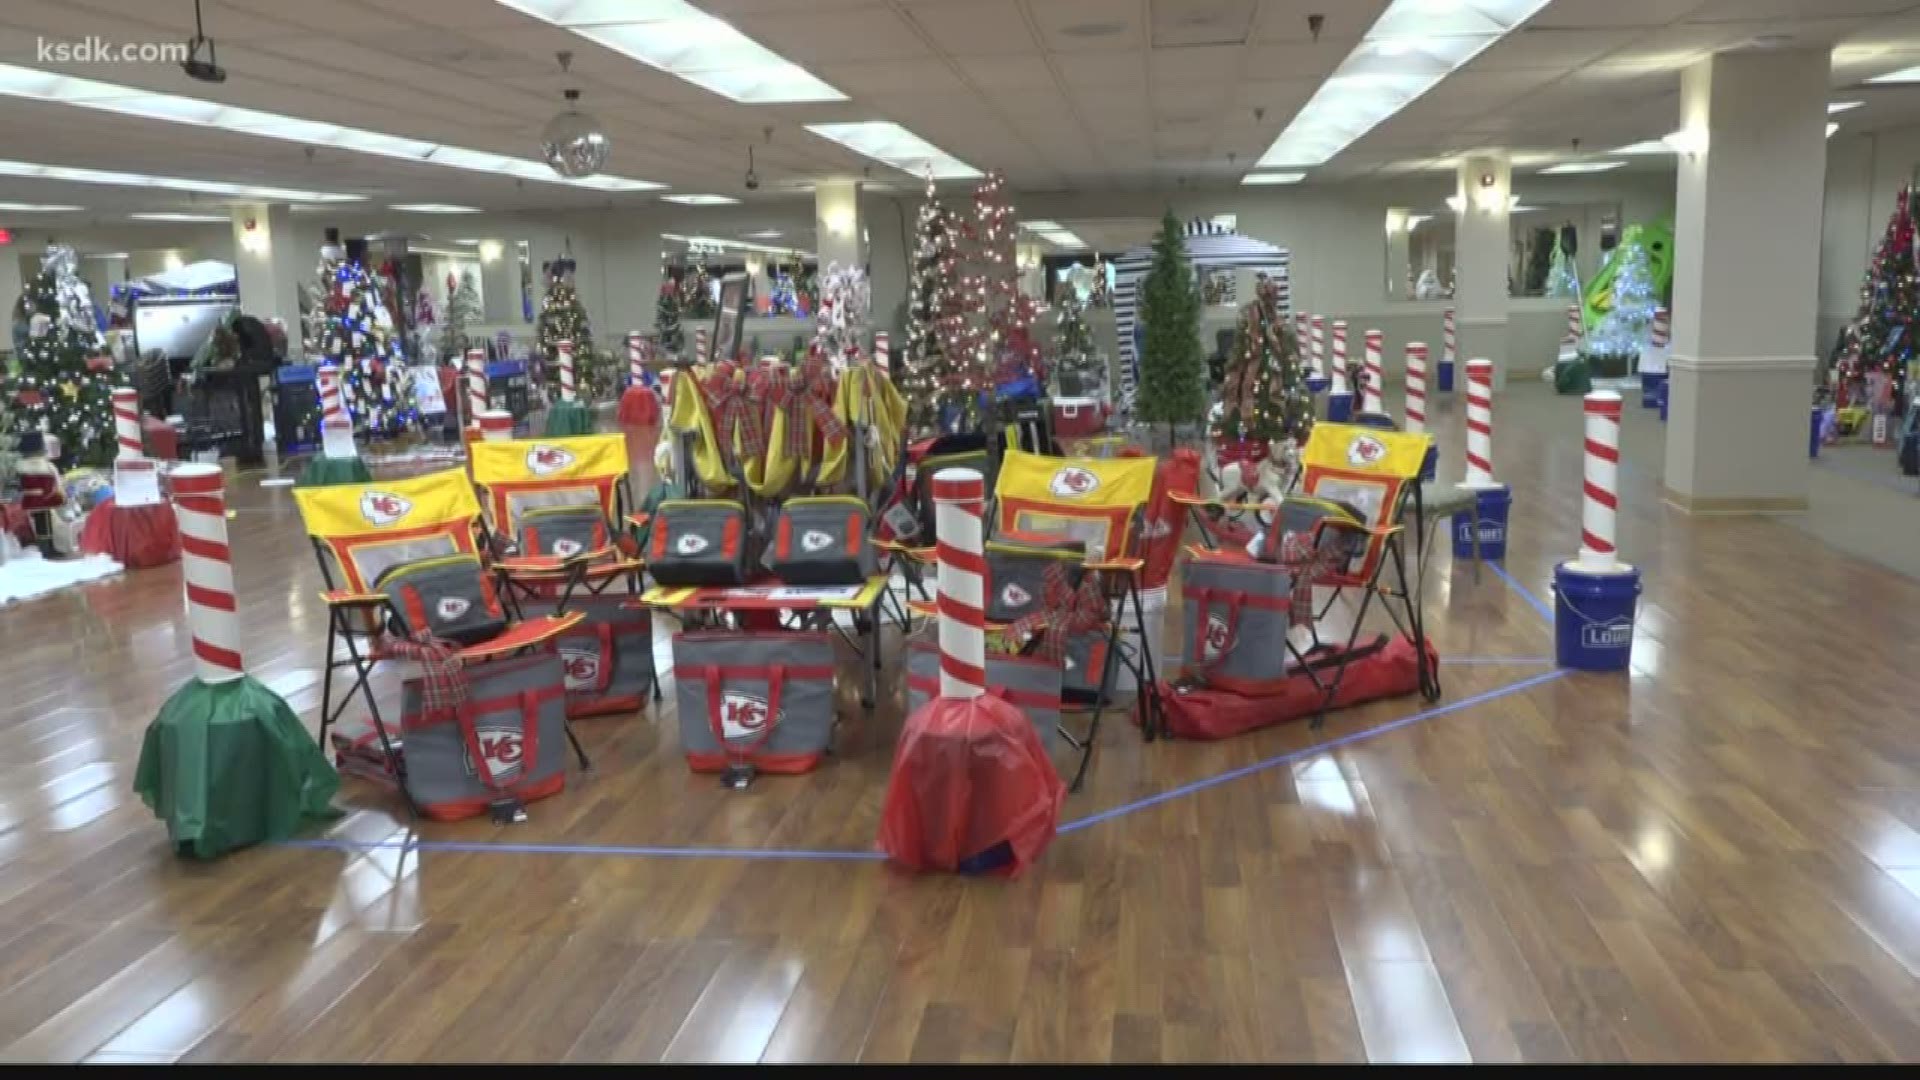 The Moolah Shriners "Feztival of Trees" kicks off this weekend